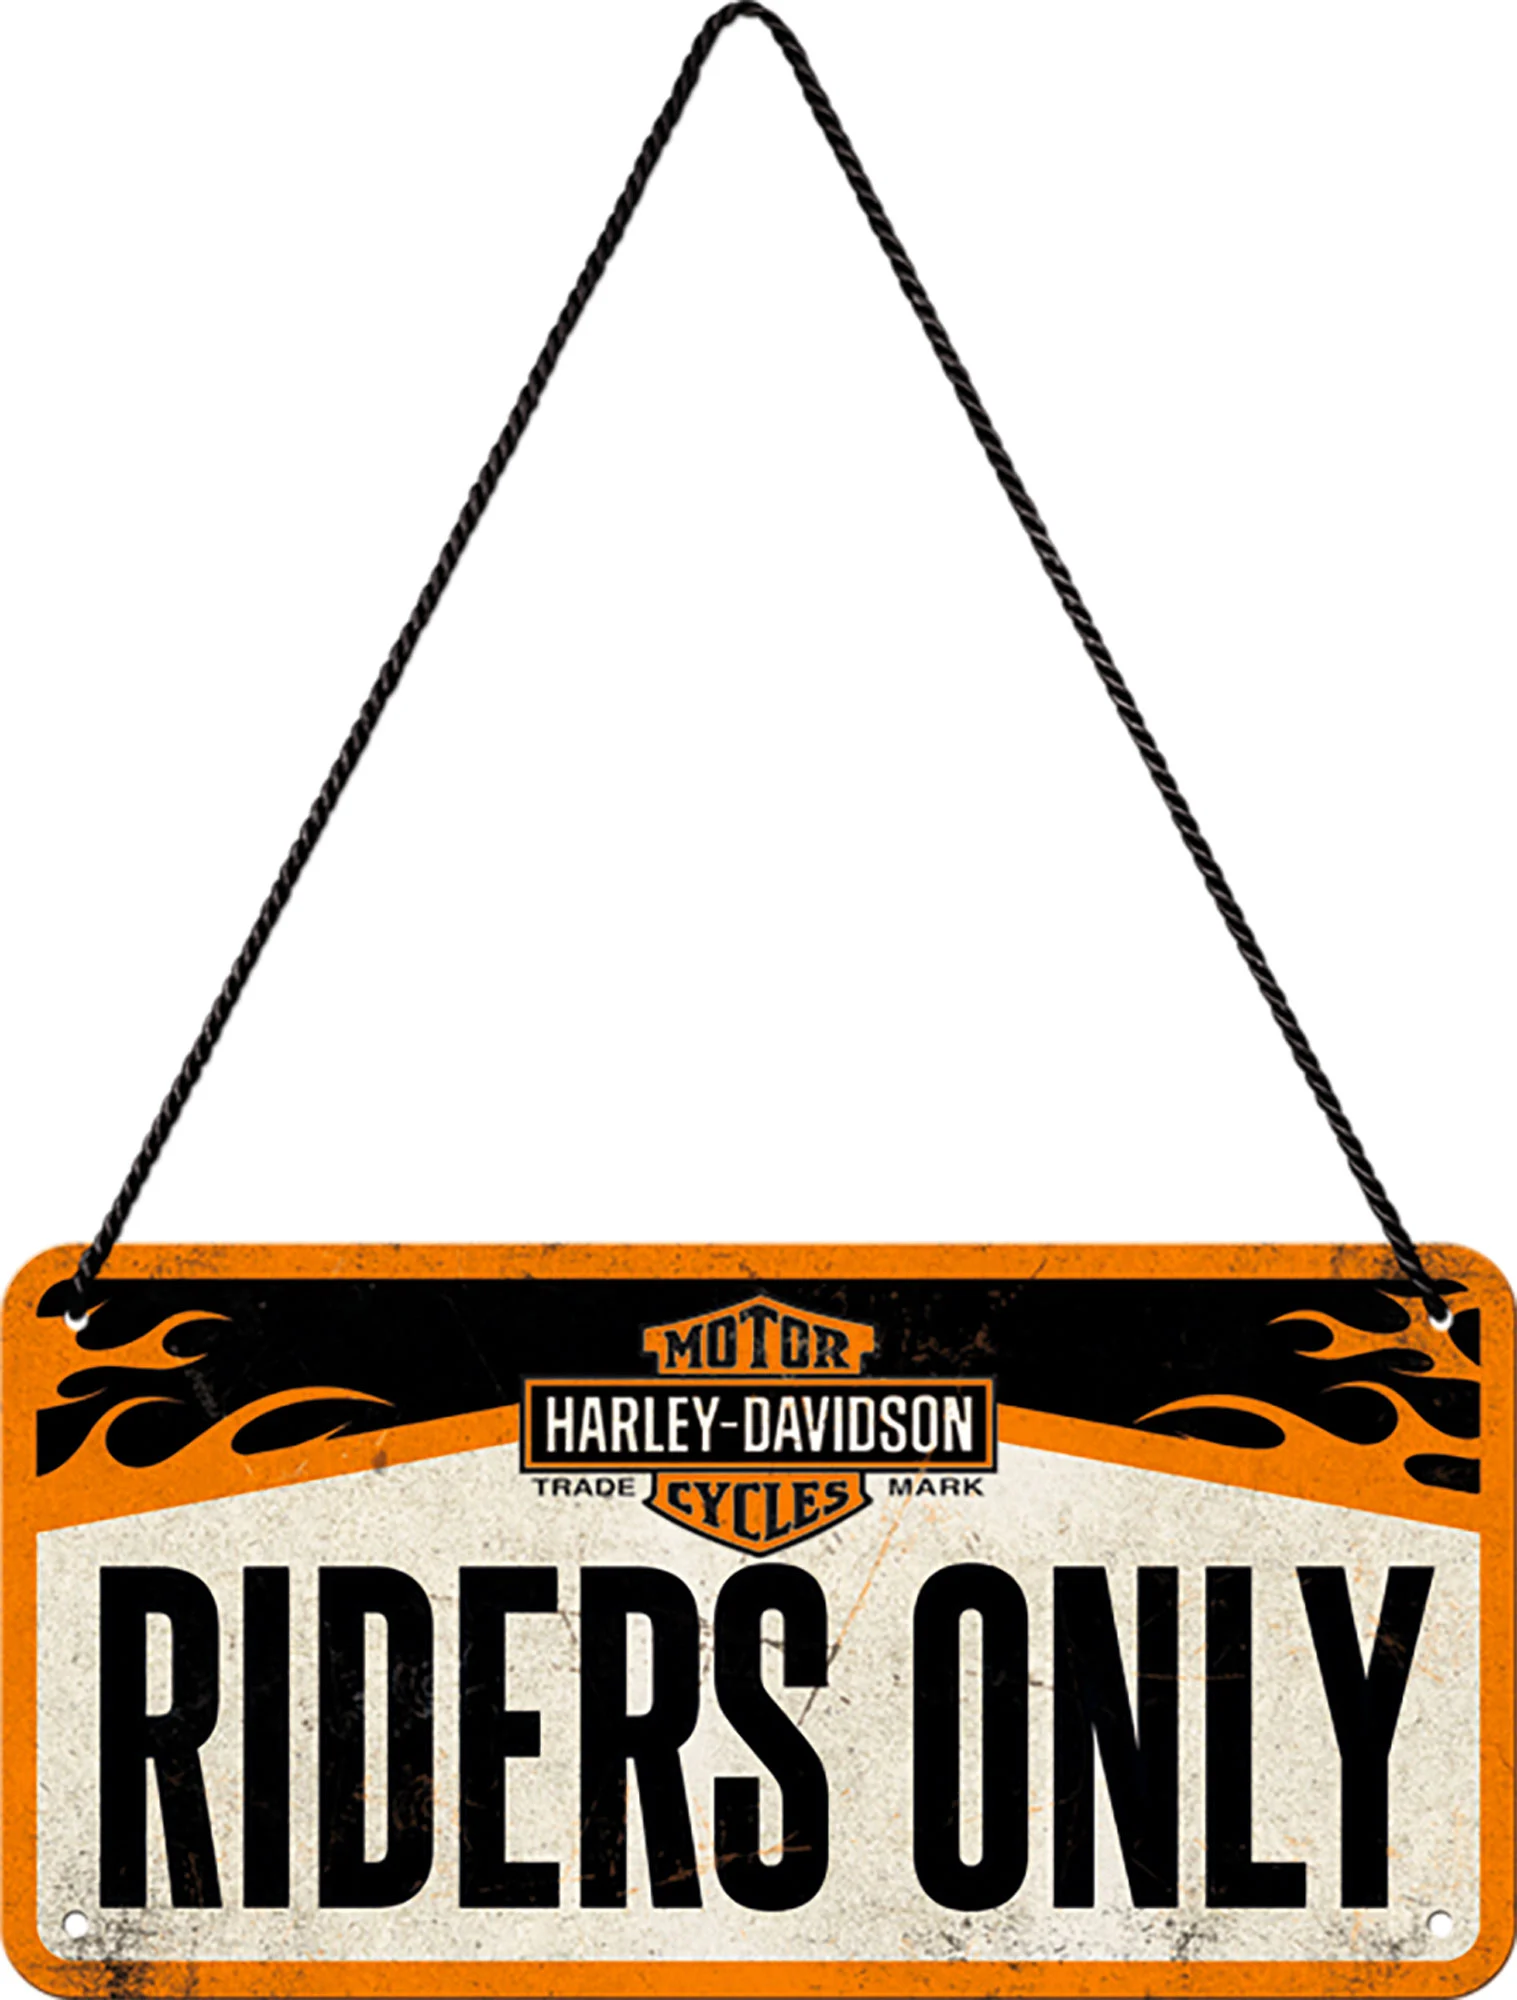 *H-D RIDERS* HANGING SIGN